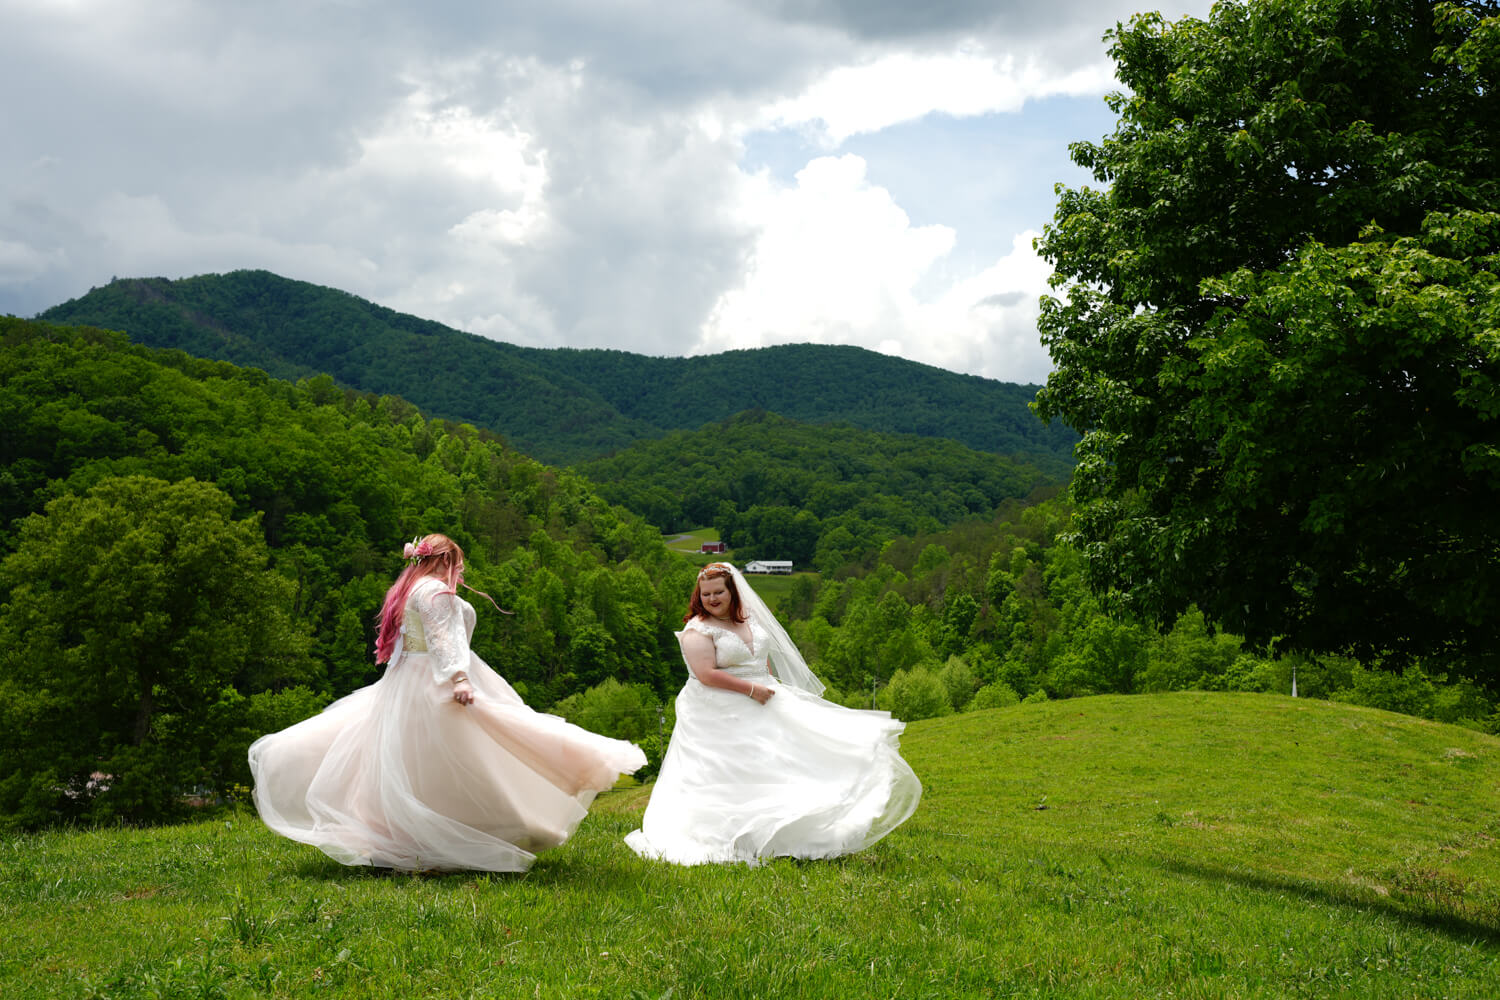 Two brides twirling around with flowing wedding dresses at a mountain view in the Smokies